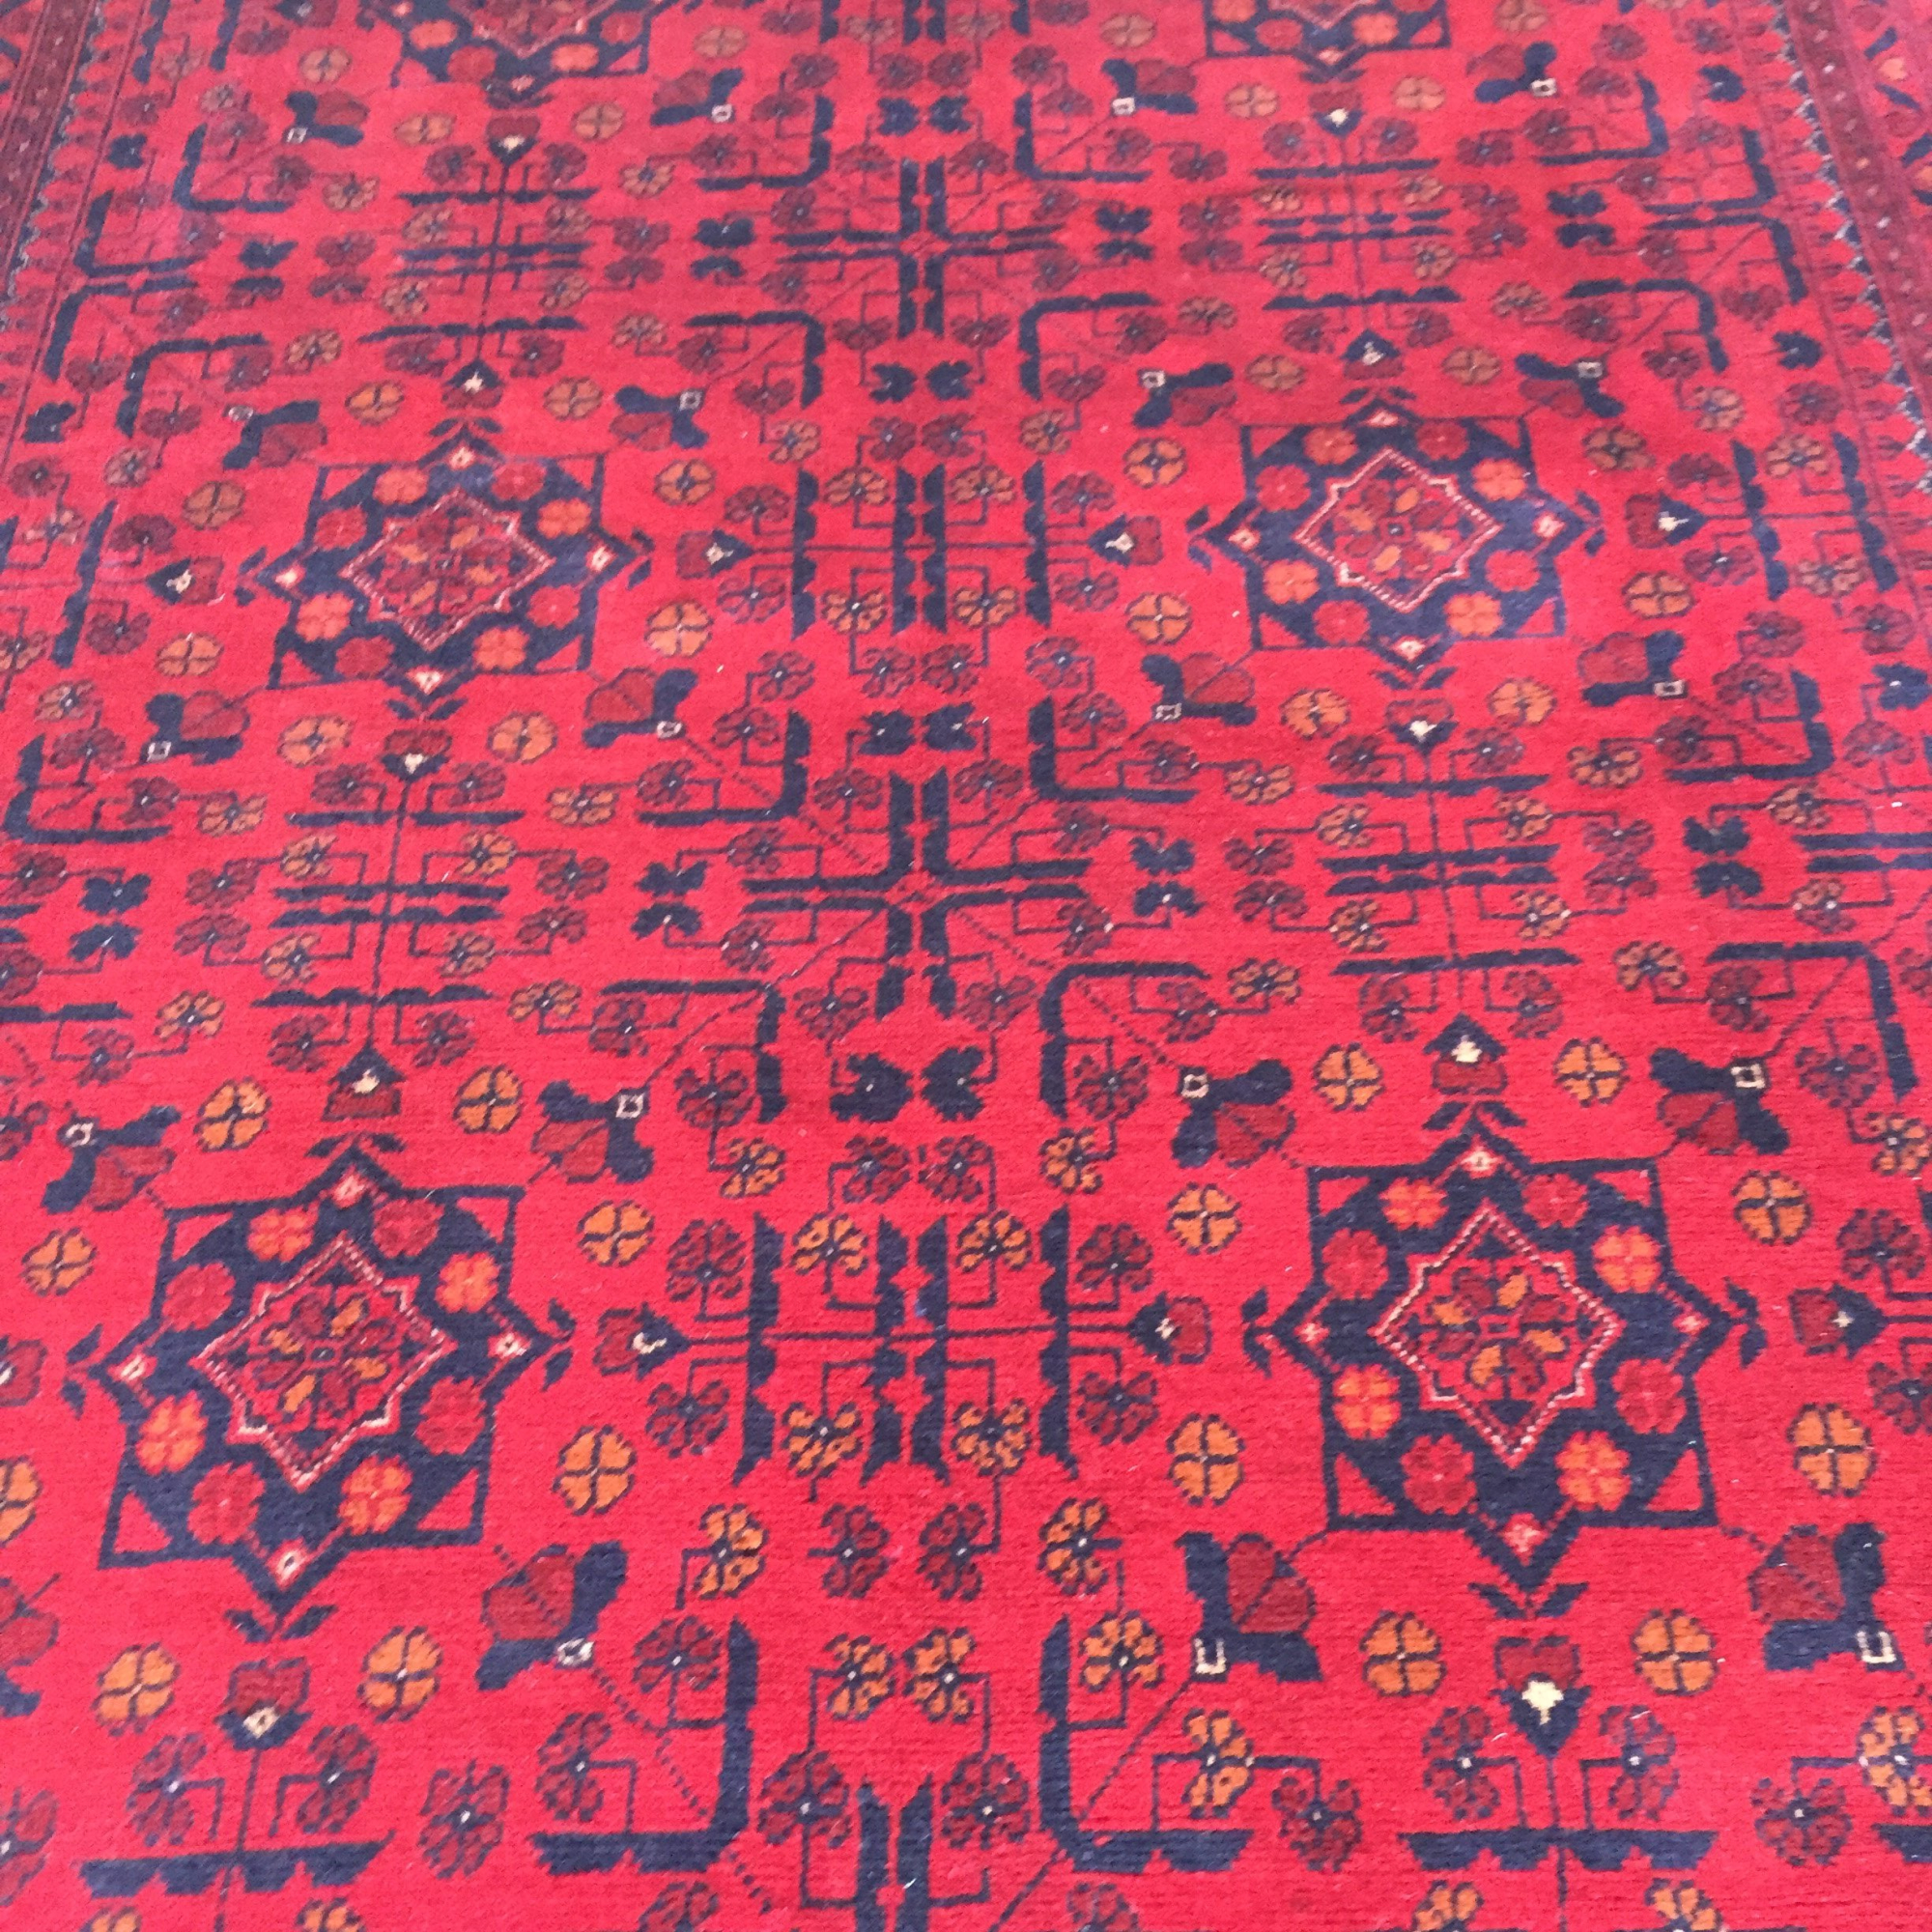 Khal Mohammadi Hand Knotted Rug 5'0